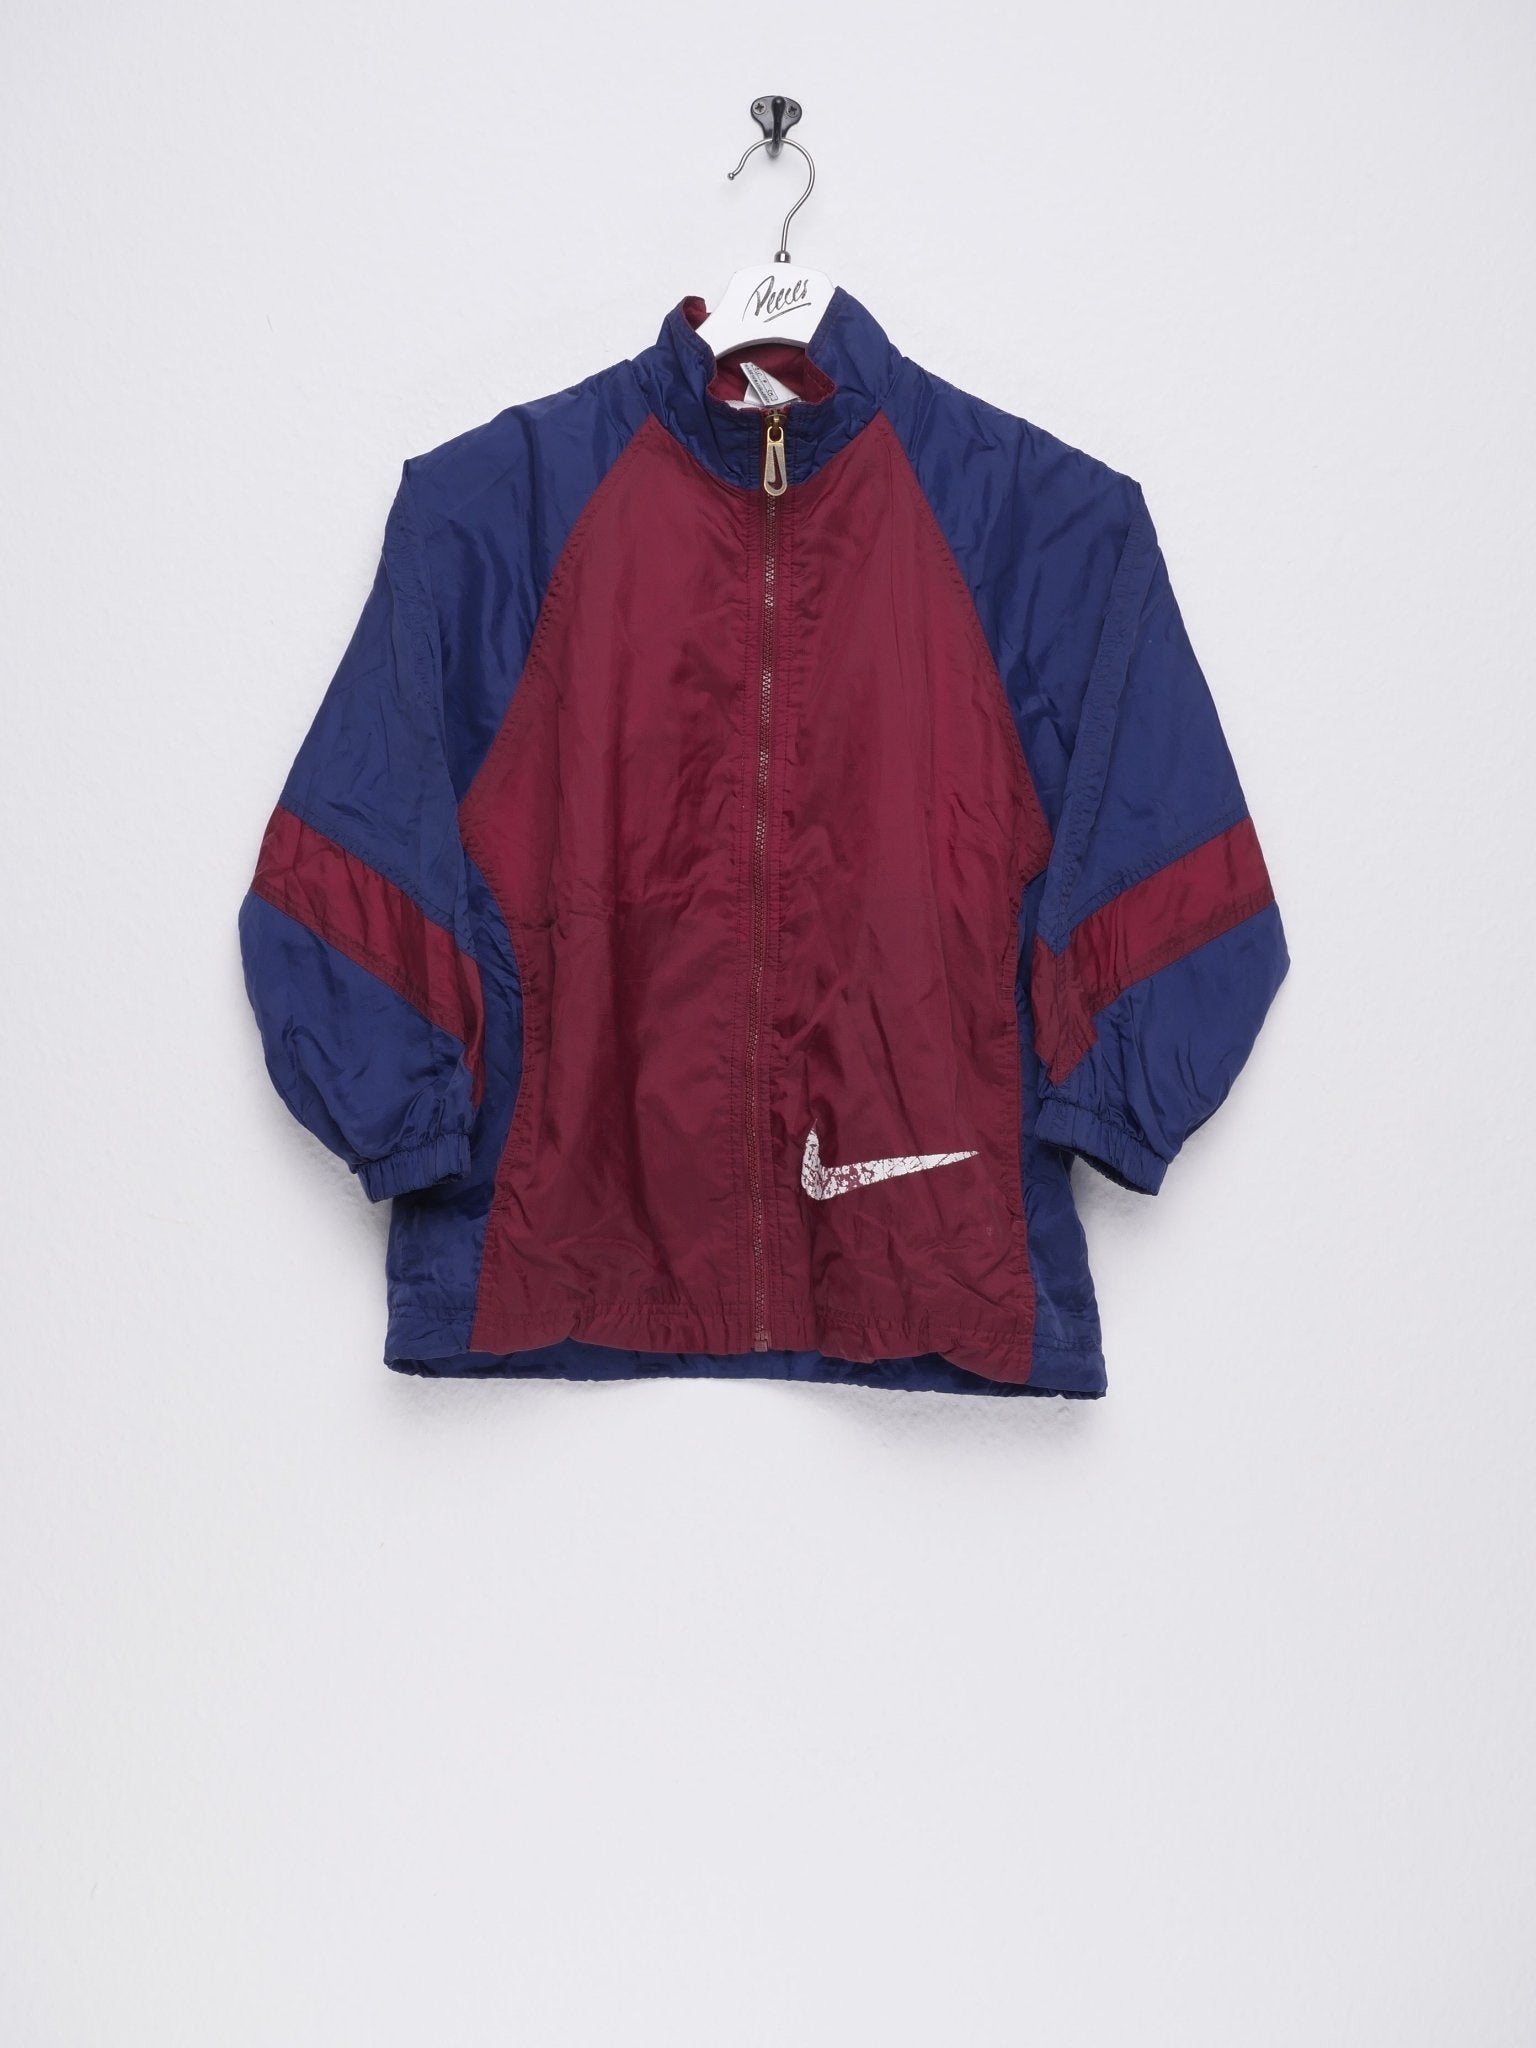 nike Red Tag embroidered Logo two toned Track Jacket - Peeces